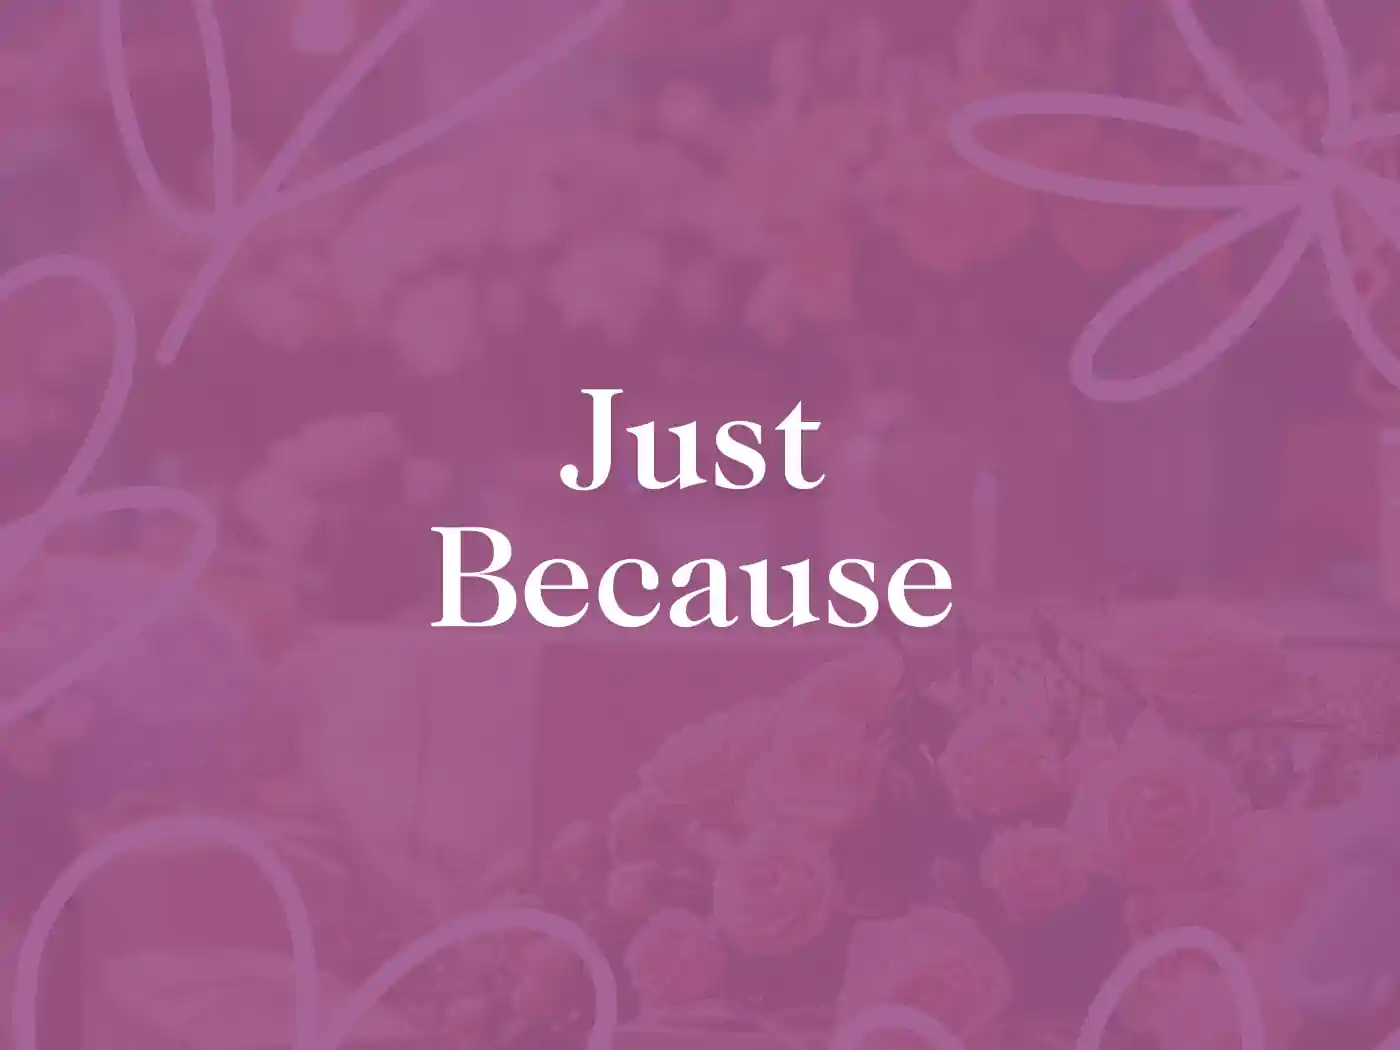 A promotional graphic with a soft-focus background of pink and purple flowers overlaid with the text 'Just Because' in elegant white font, representing a thoughtful gesture. Fabulous Flowers and Gifts. Just Because. Delivered with Heart